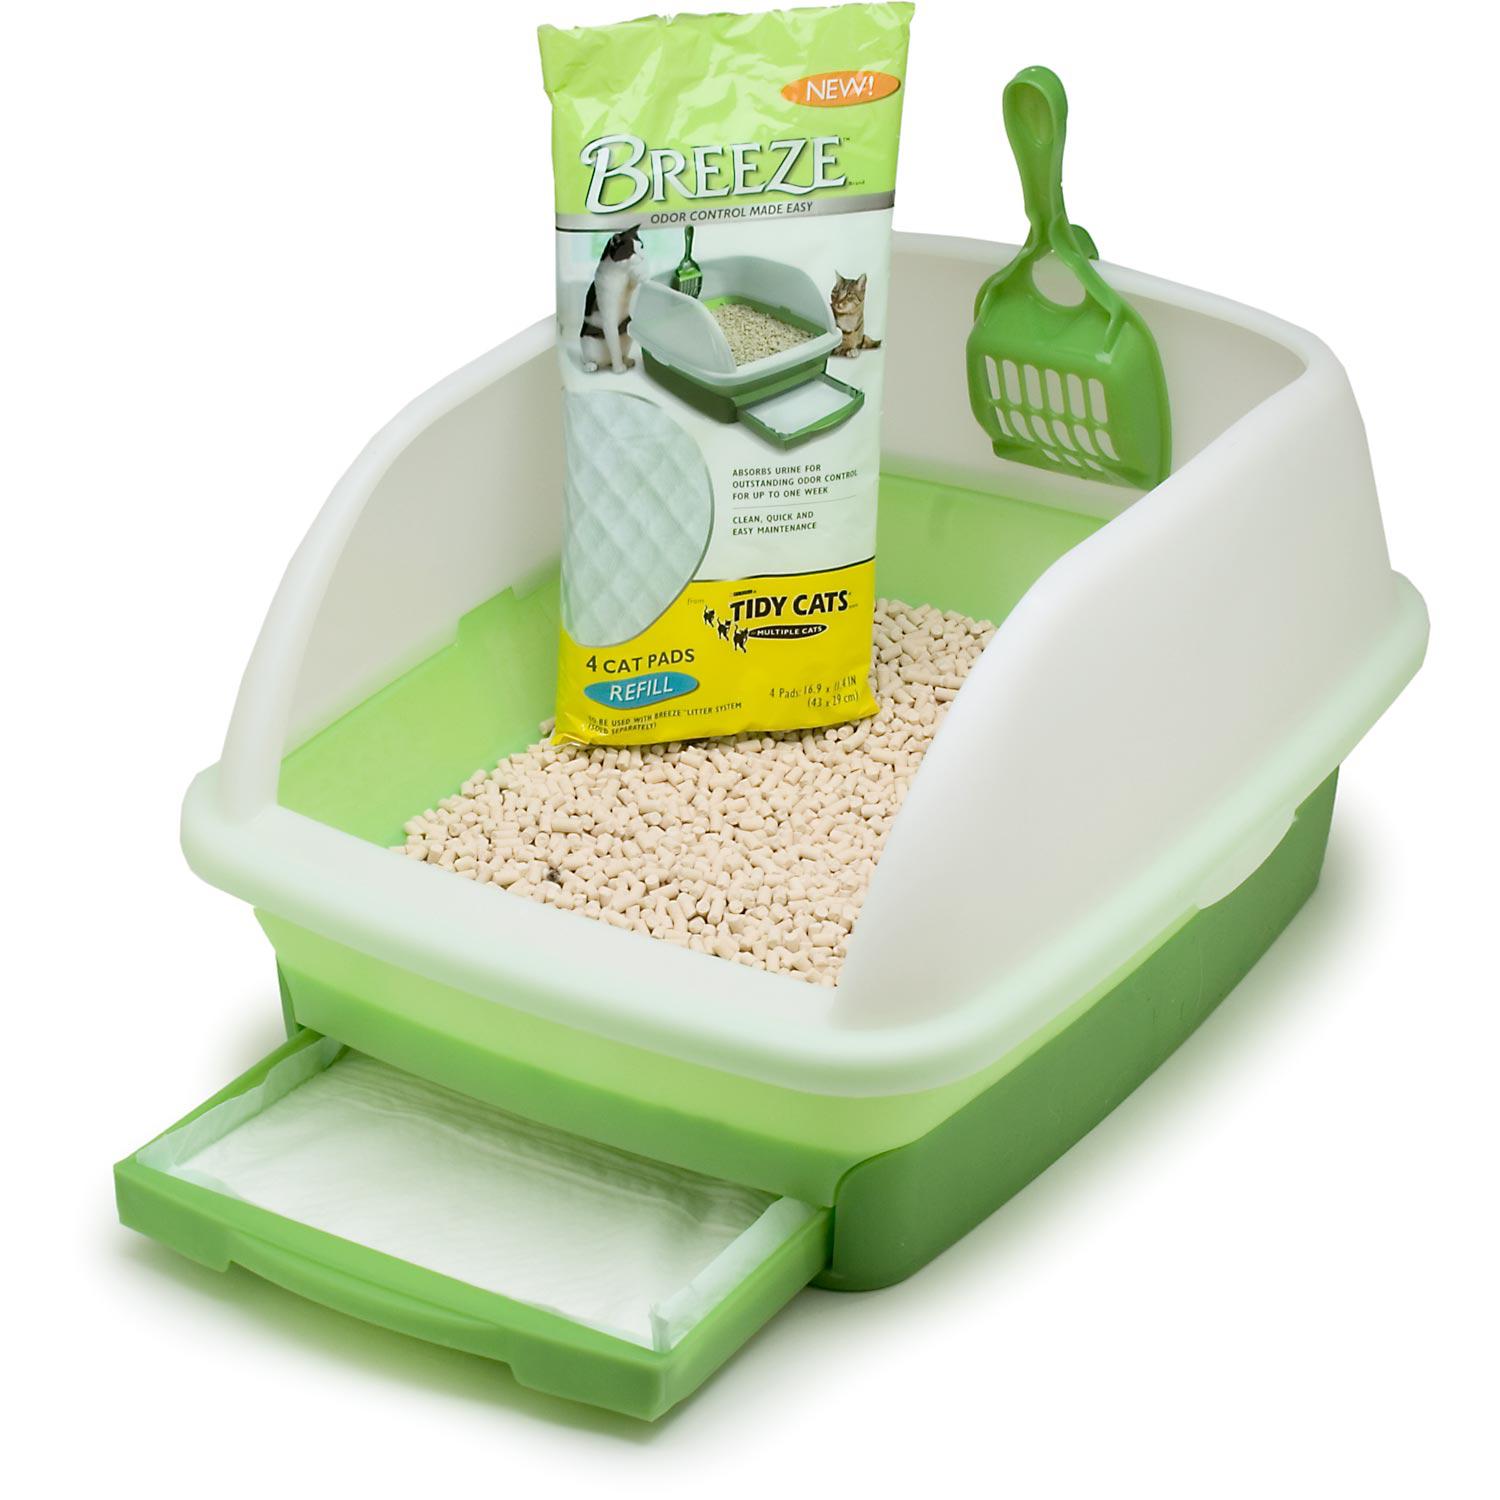 Tidy Cats Breeze Litter Box System from petco.com